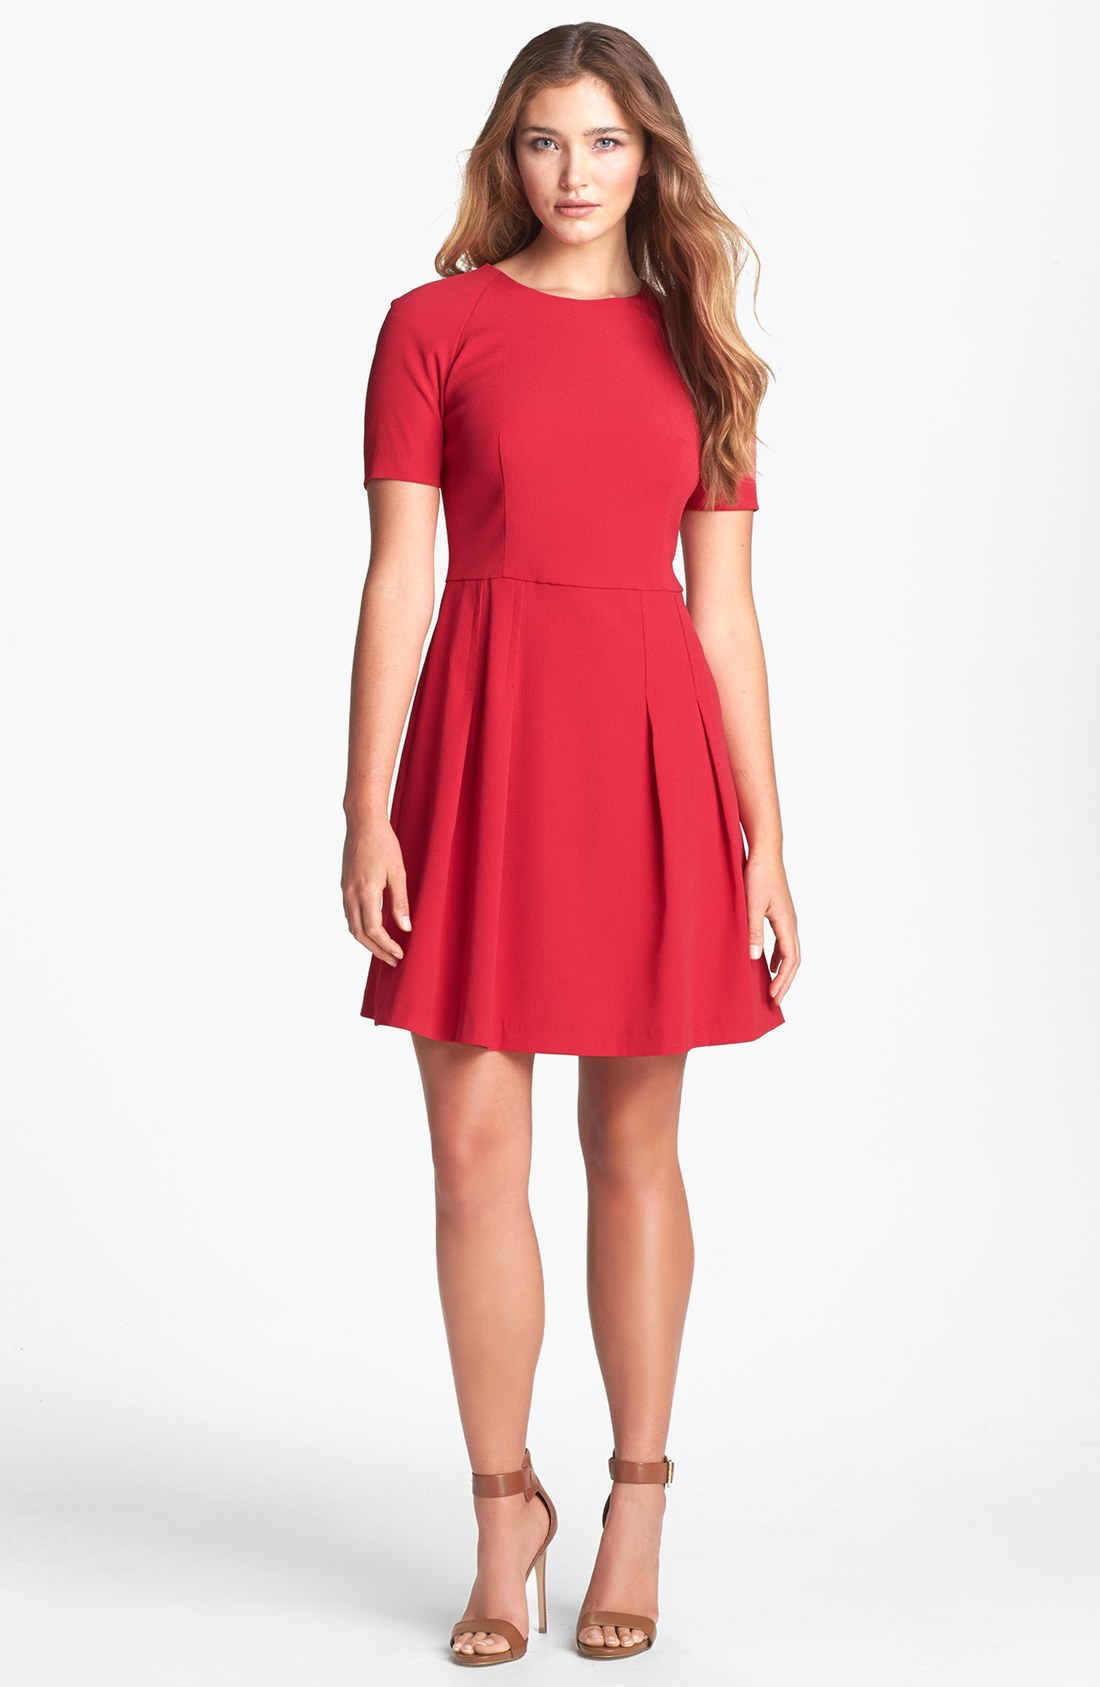 Nicole Miller Satin Crepe Fit Flare Dress in Red (Cherry) | Lyst